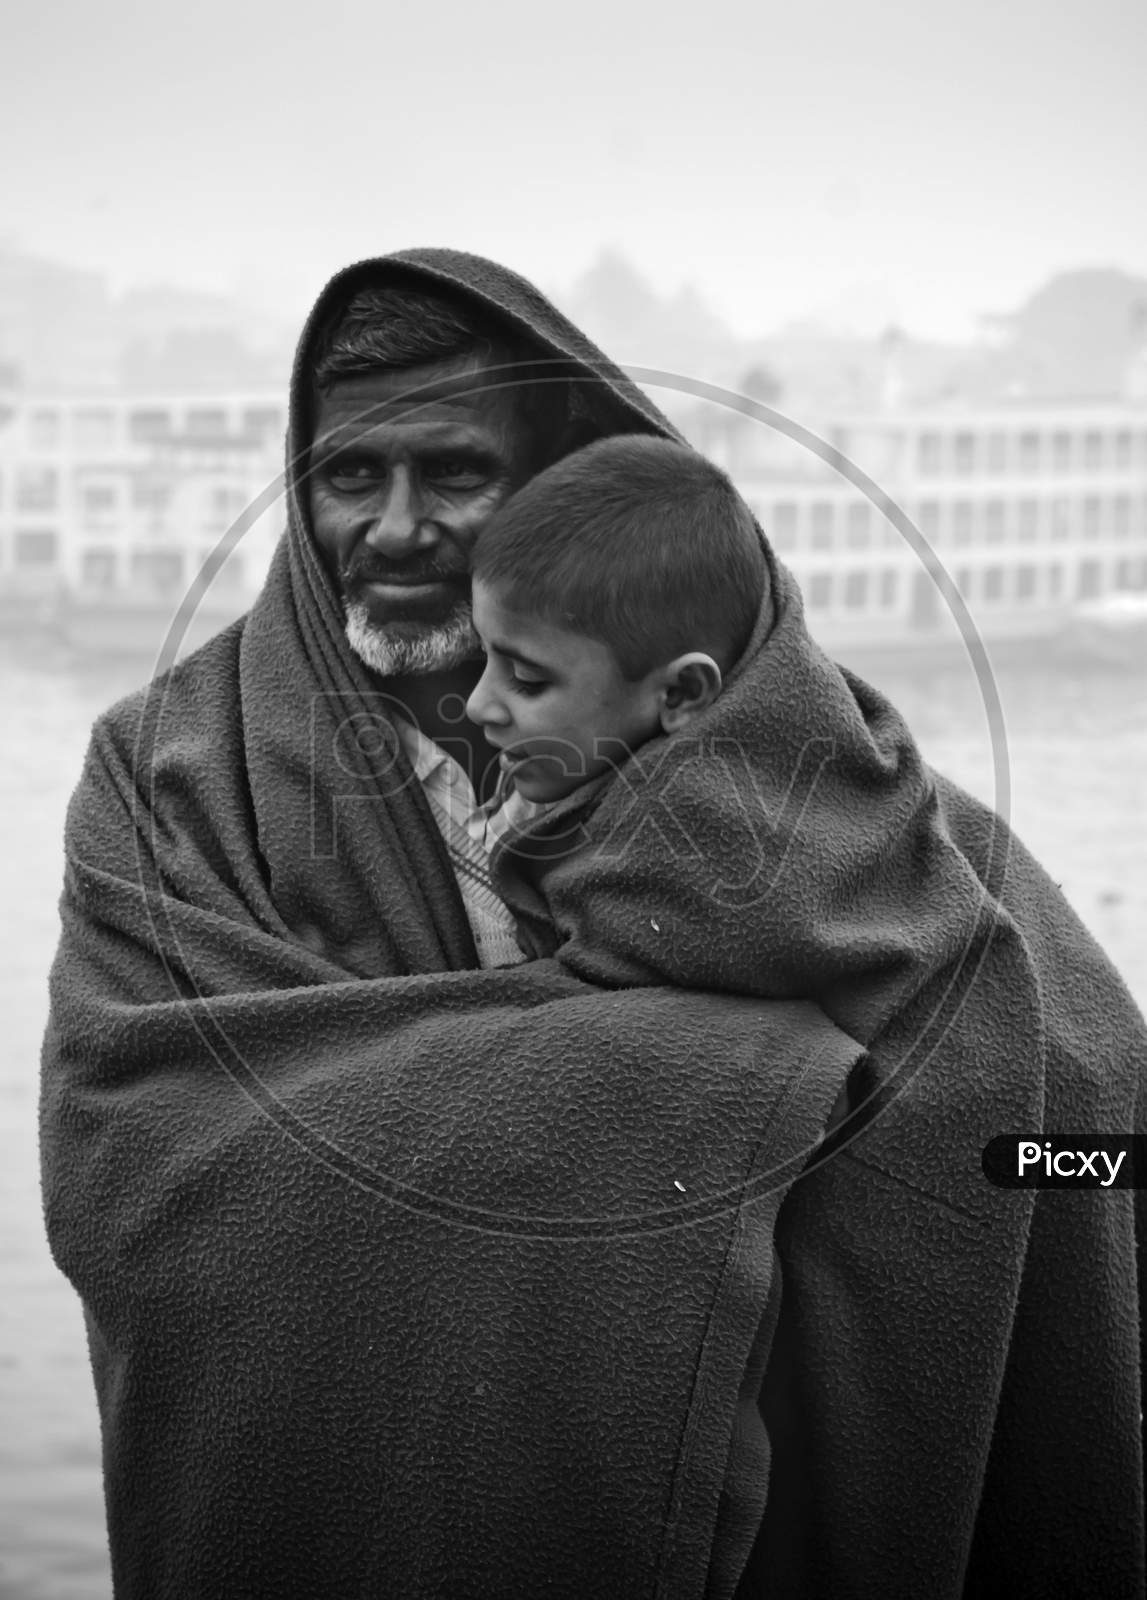 Bangladesh – January 06, 2014: A Boy And His Father Watching The Winter River With The Full Body Of Wearing A Thick Blanket On A Winter Morning.